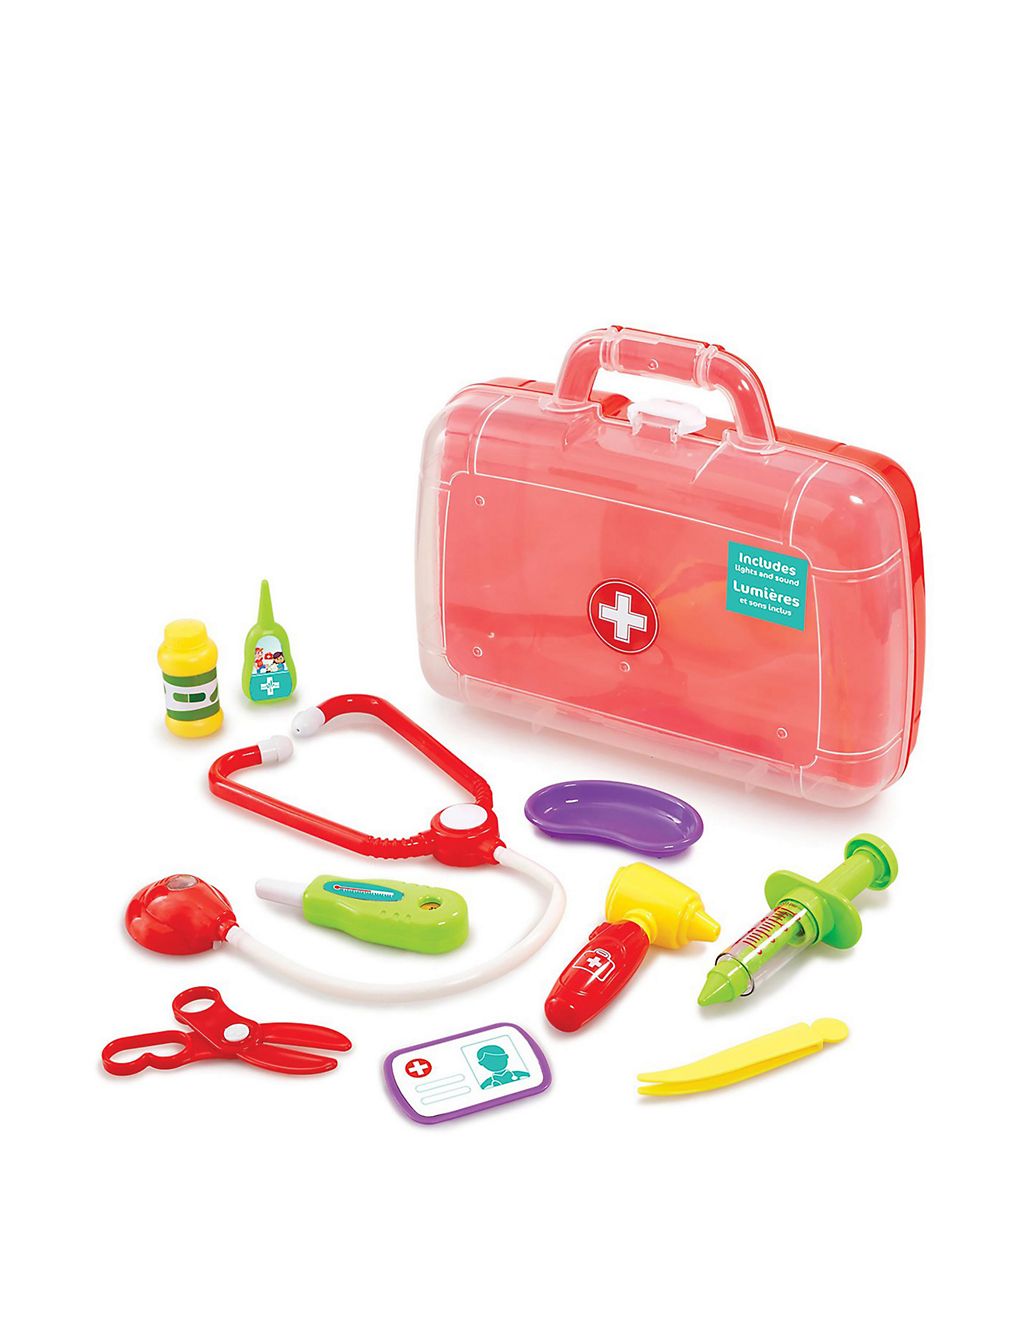 Busy Me My Medical Case Playset (3-6 Yrs) 1 of 1